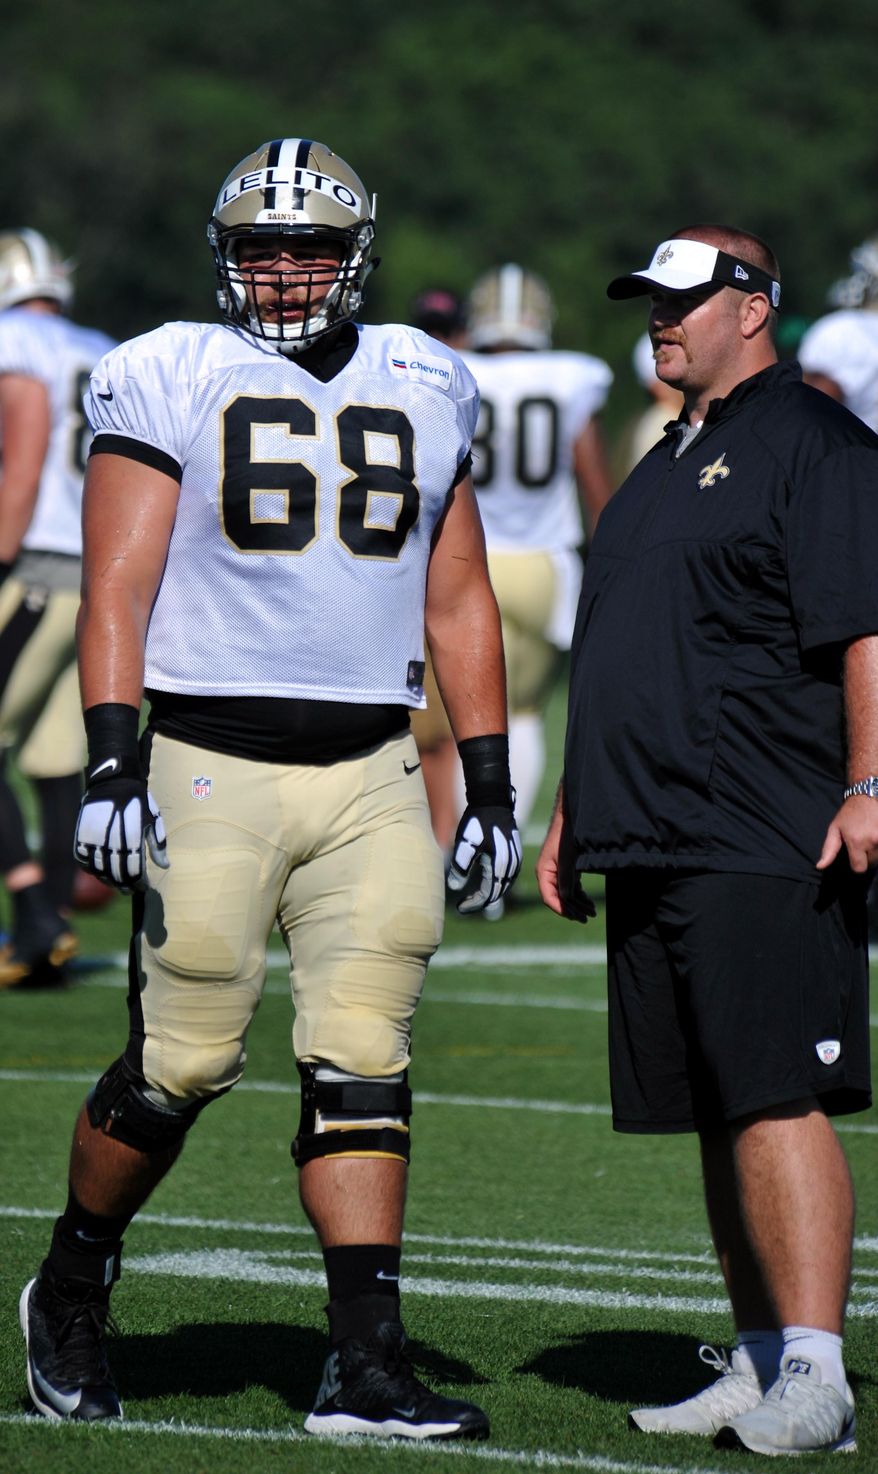 New Orleans Saints center Tim Lelito (68) talks with staff during a drill at  the team&#39;s NFL football training camp in White Sulphur Springs, W. Va., Saturday, Aug. 1, 2015. (AP Photo/Chris Tilley)